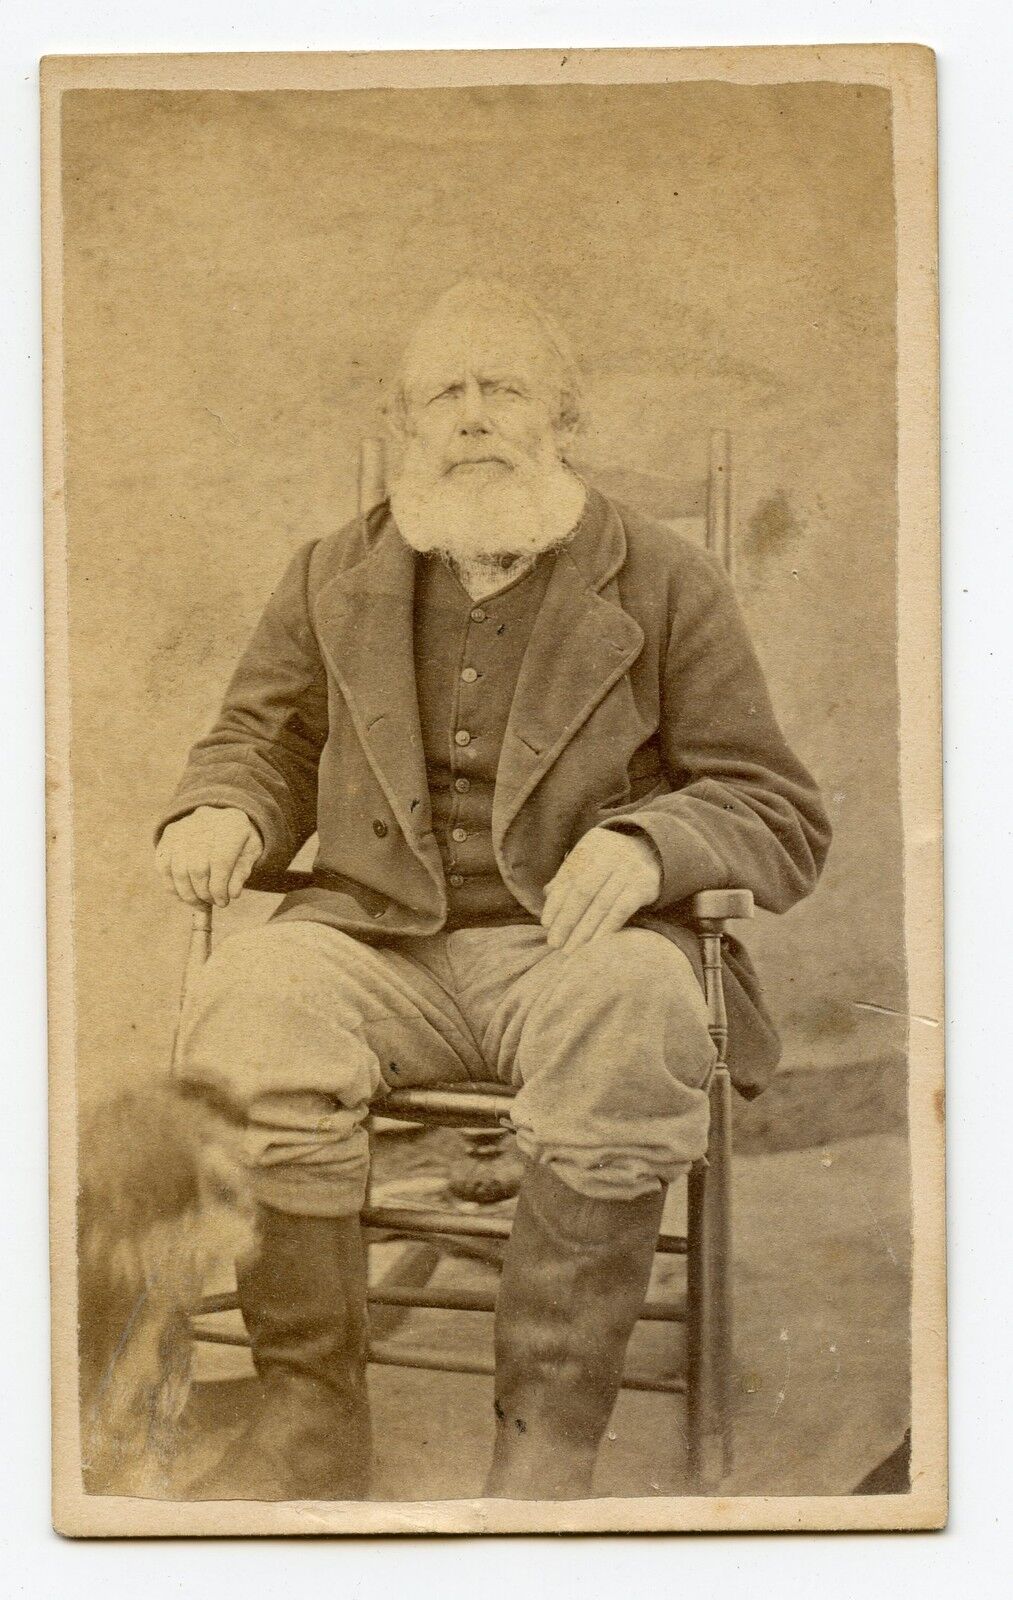 Old Bearded Man in a High Boots, Dog, Vintage CDV Photo